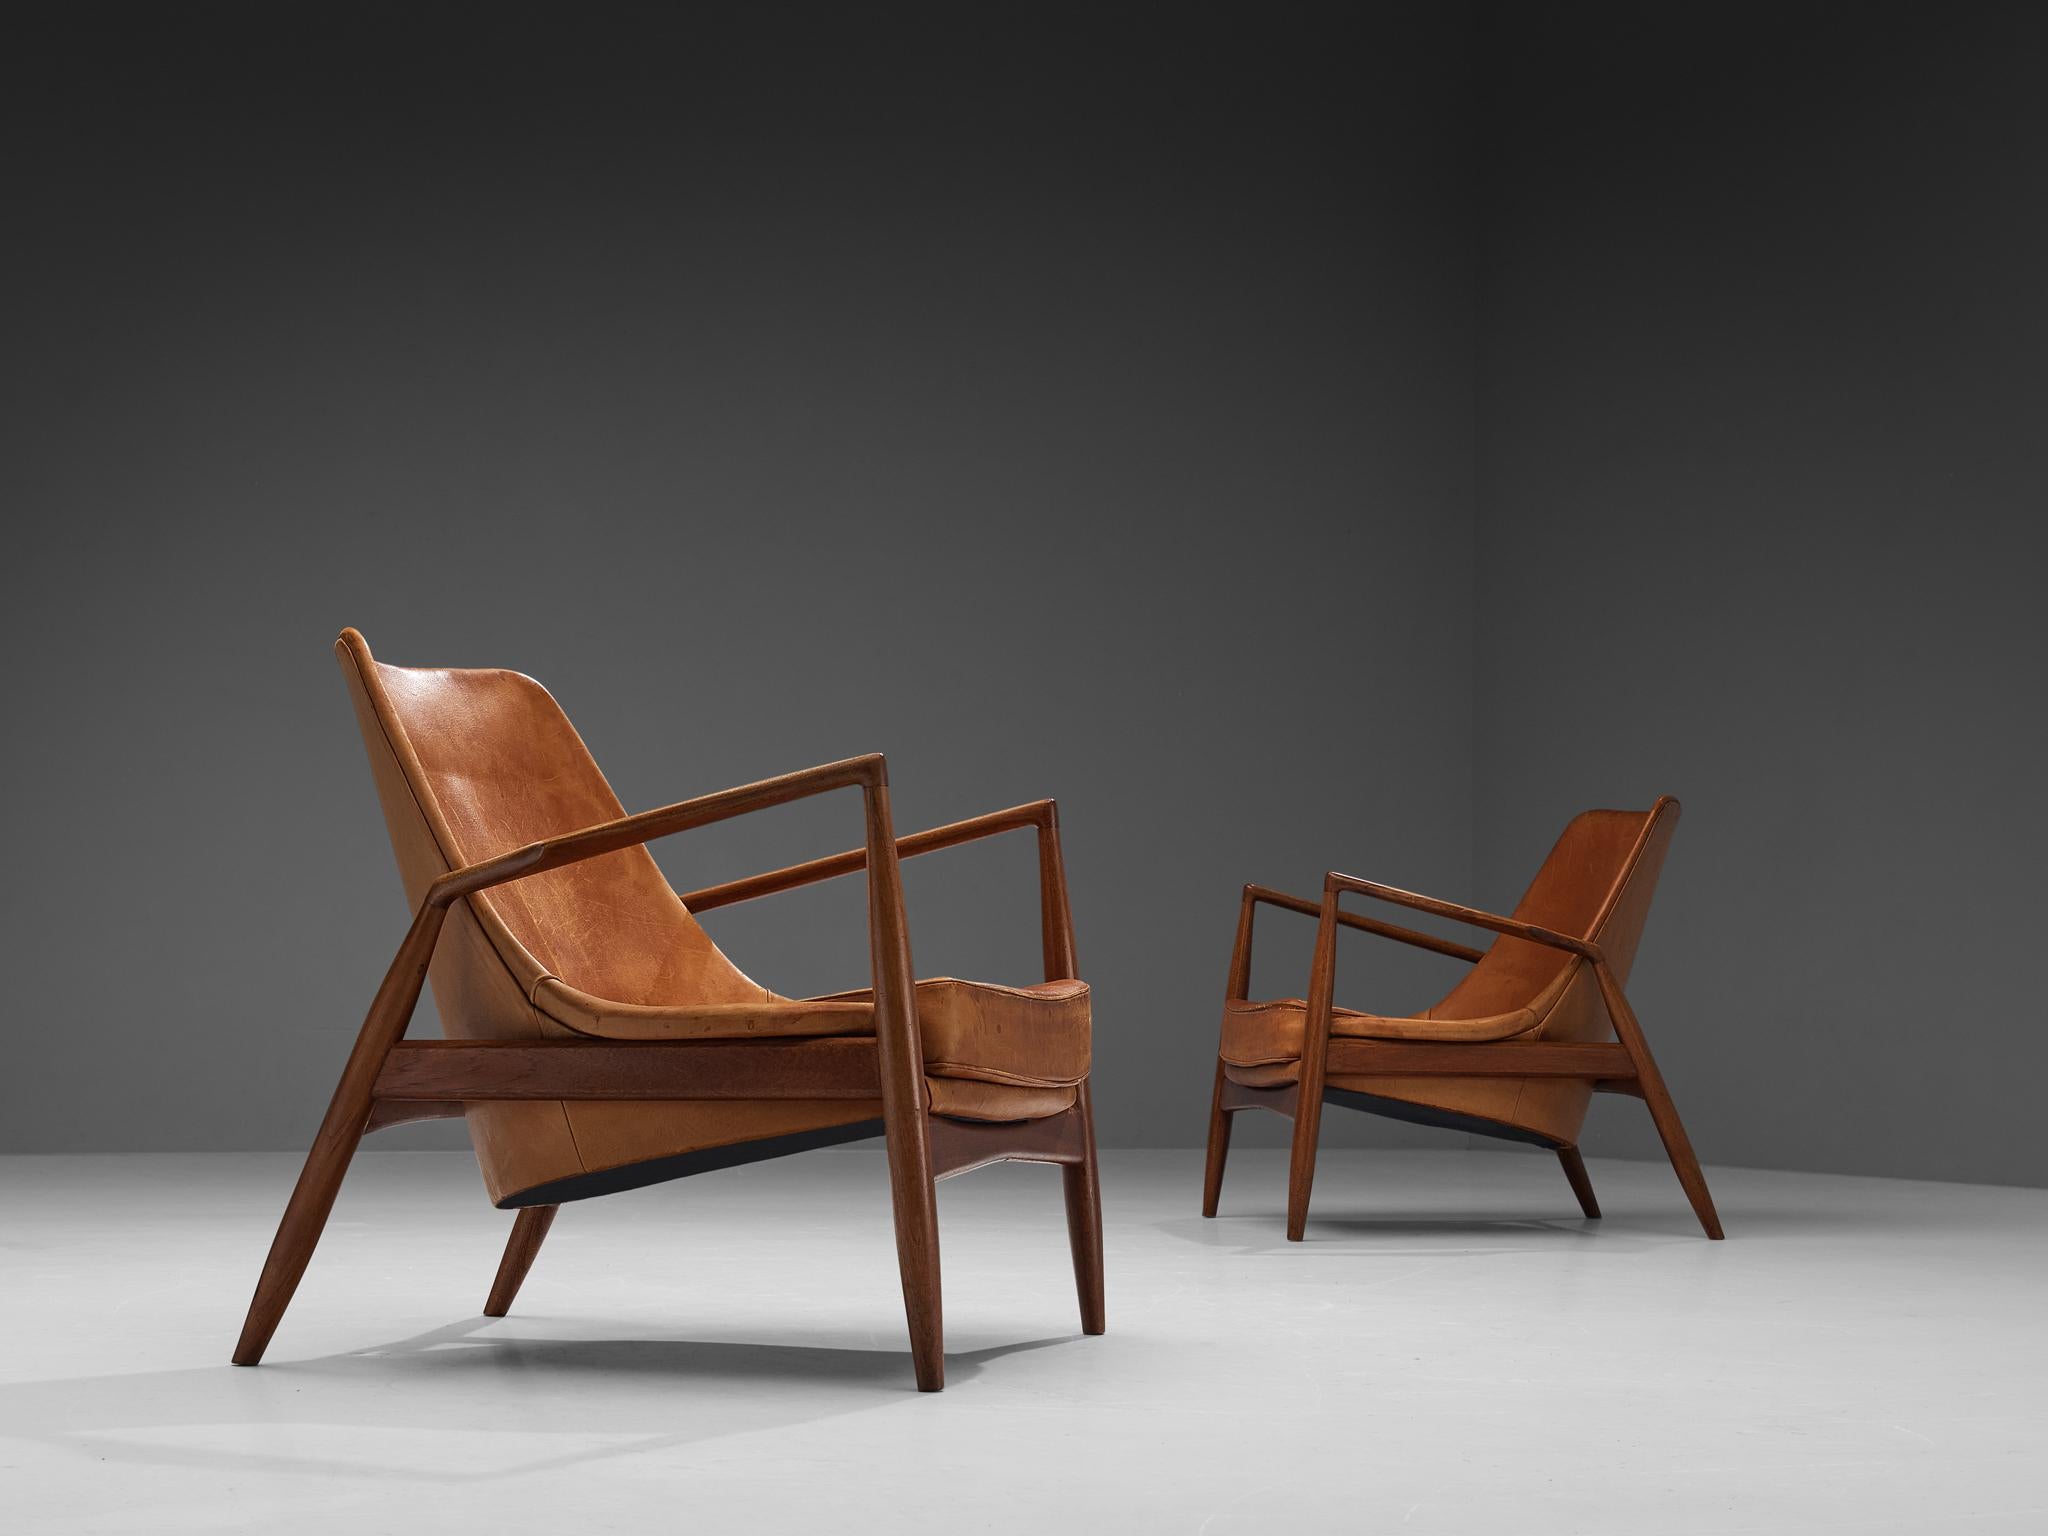 Ib Kofod-Larsen for OPE Möbler, pair of 'Sälen' (Seal) lounge chairs model 503-799, teak and leather, Sweden, 1956

Iconic 'Sälen' lounge chairs by Danish designer Ib Kofod-Larsen. The well-crafted frame of these chairs is made out of a warm colored